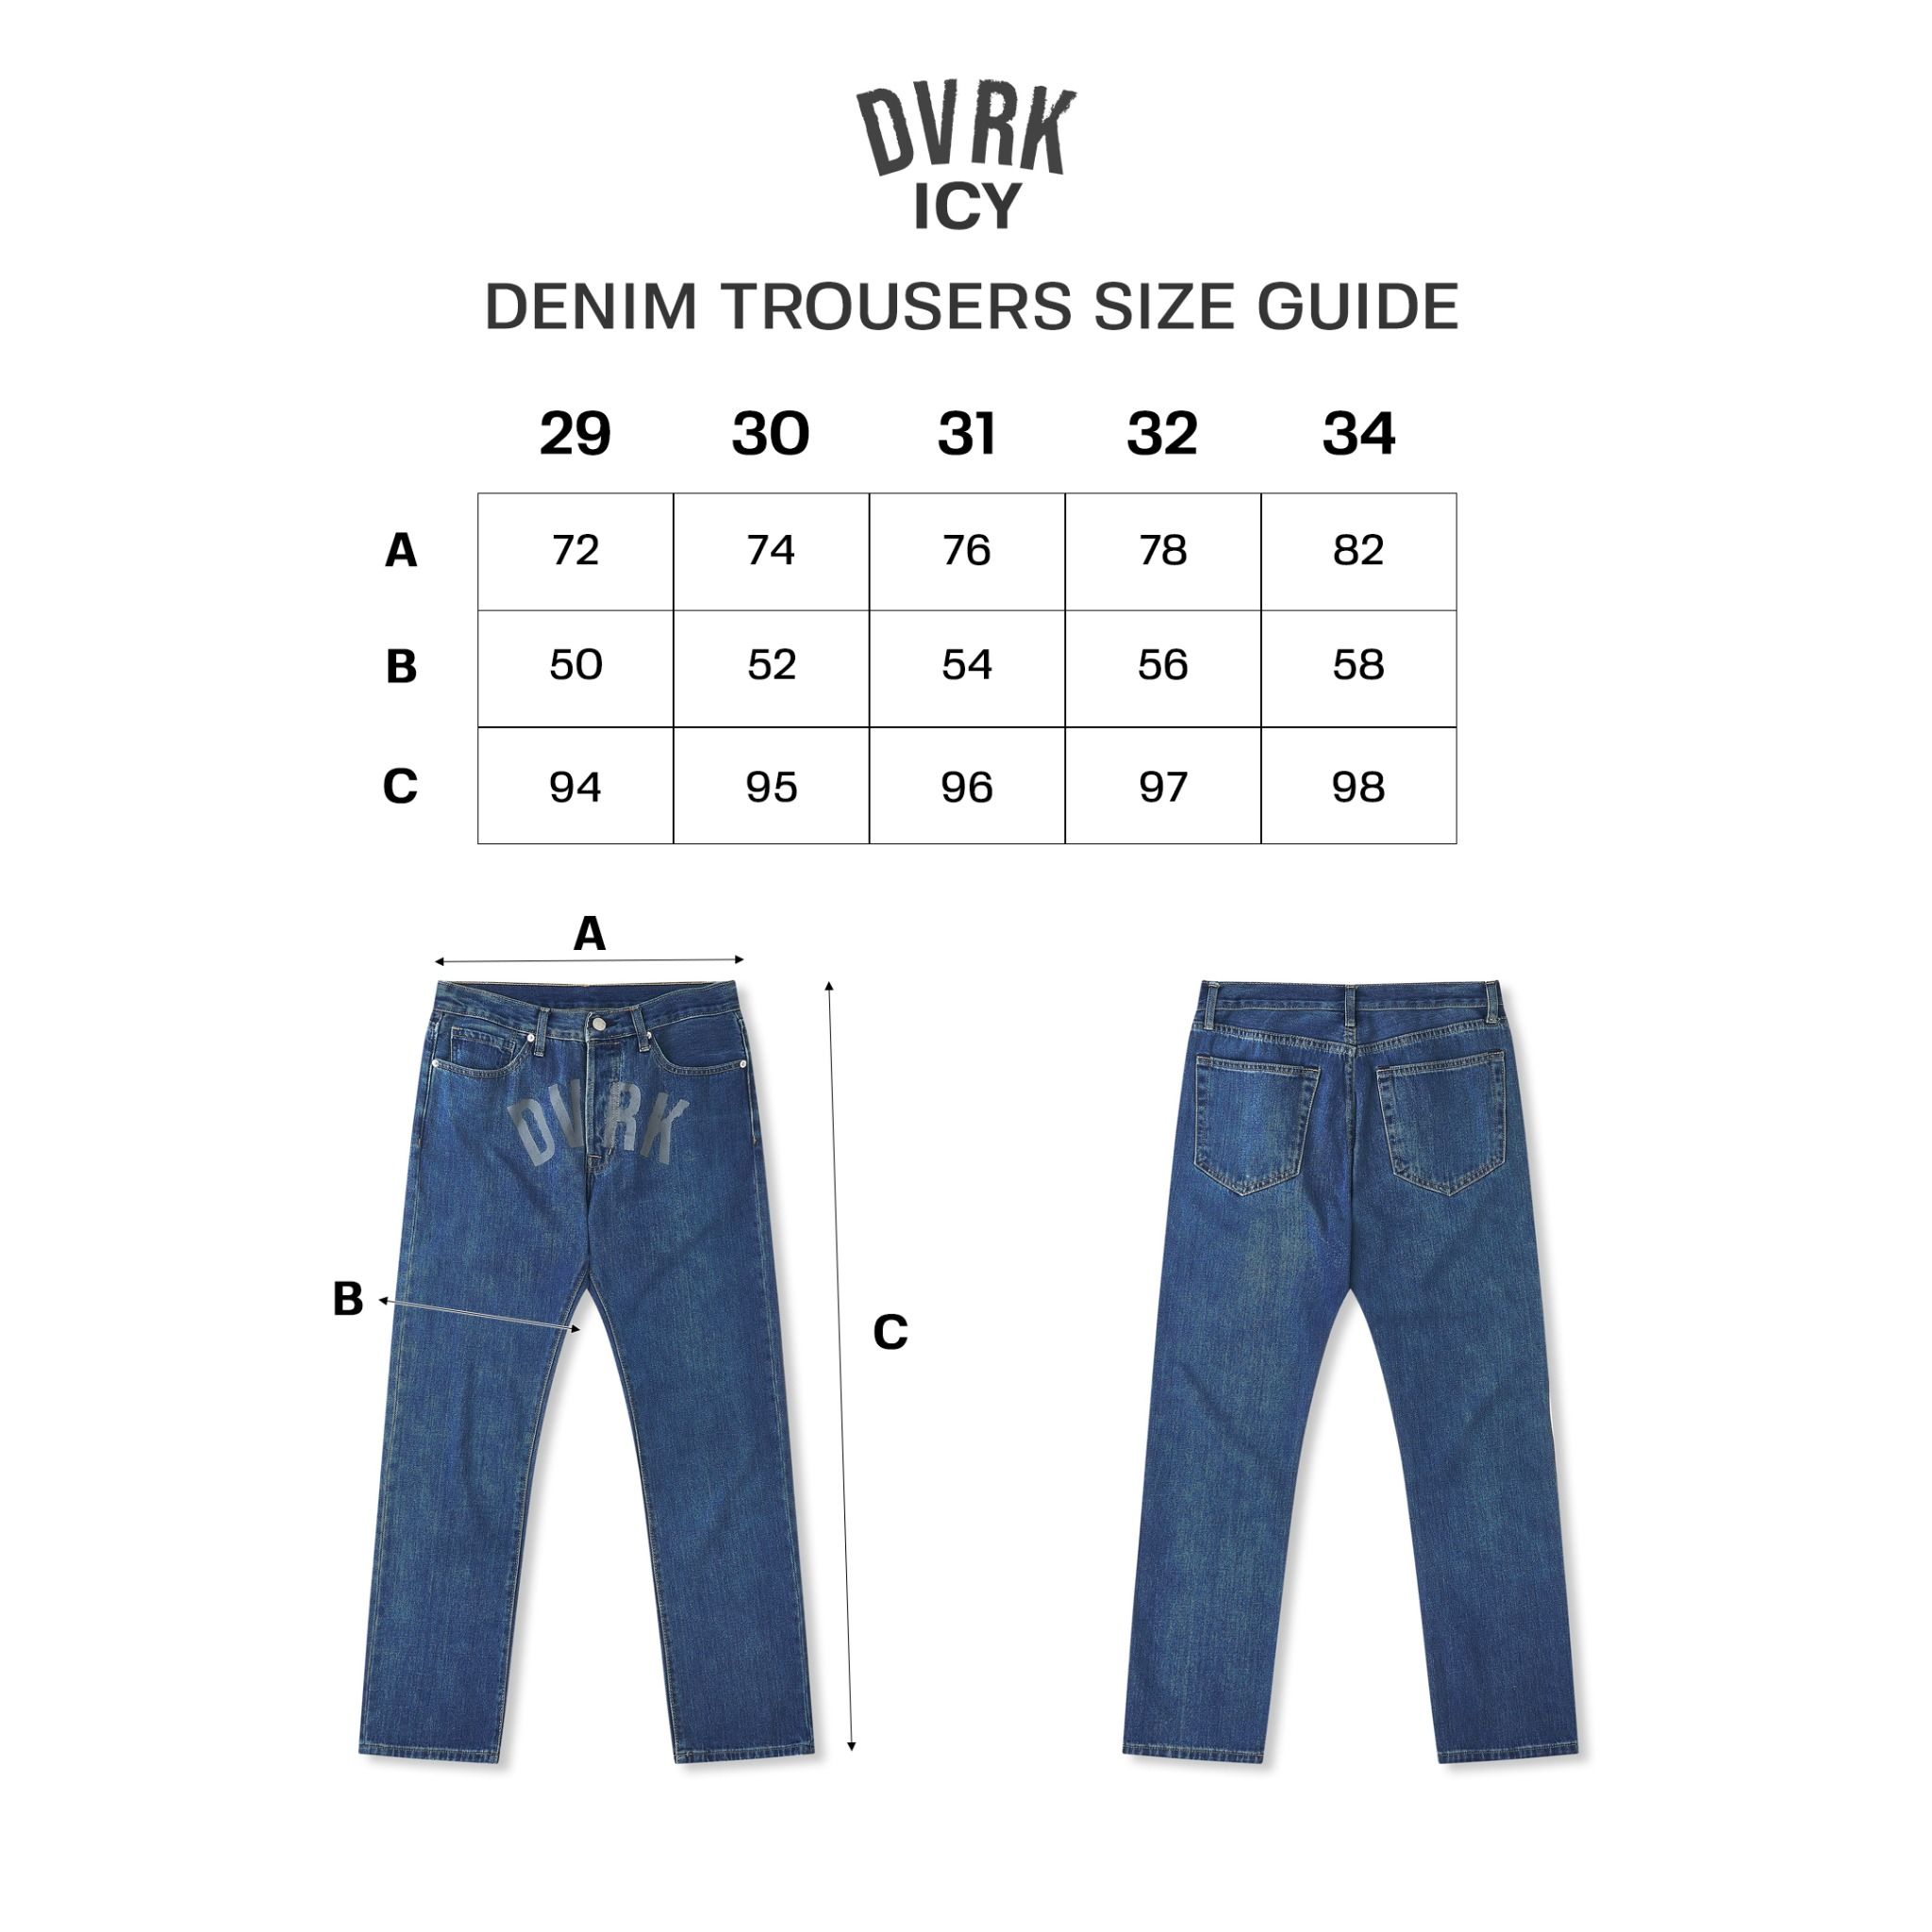 DVRK ICY JEANS